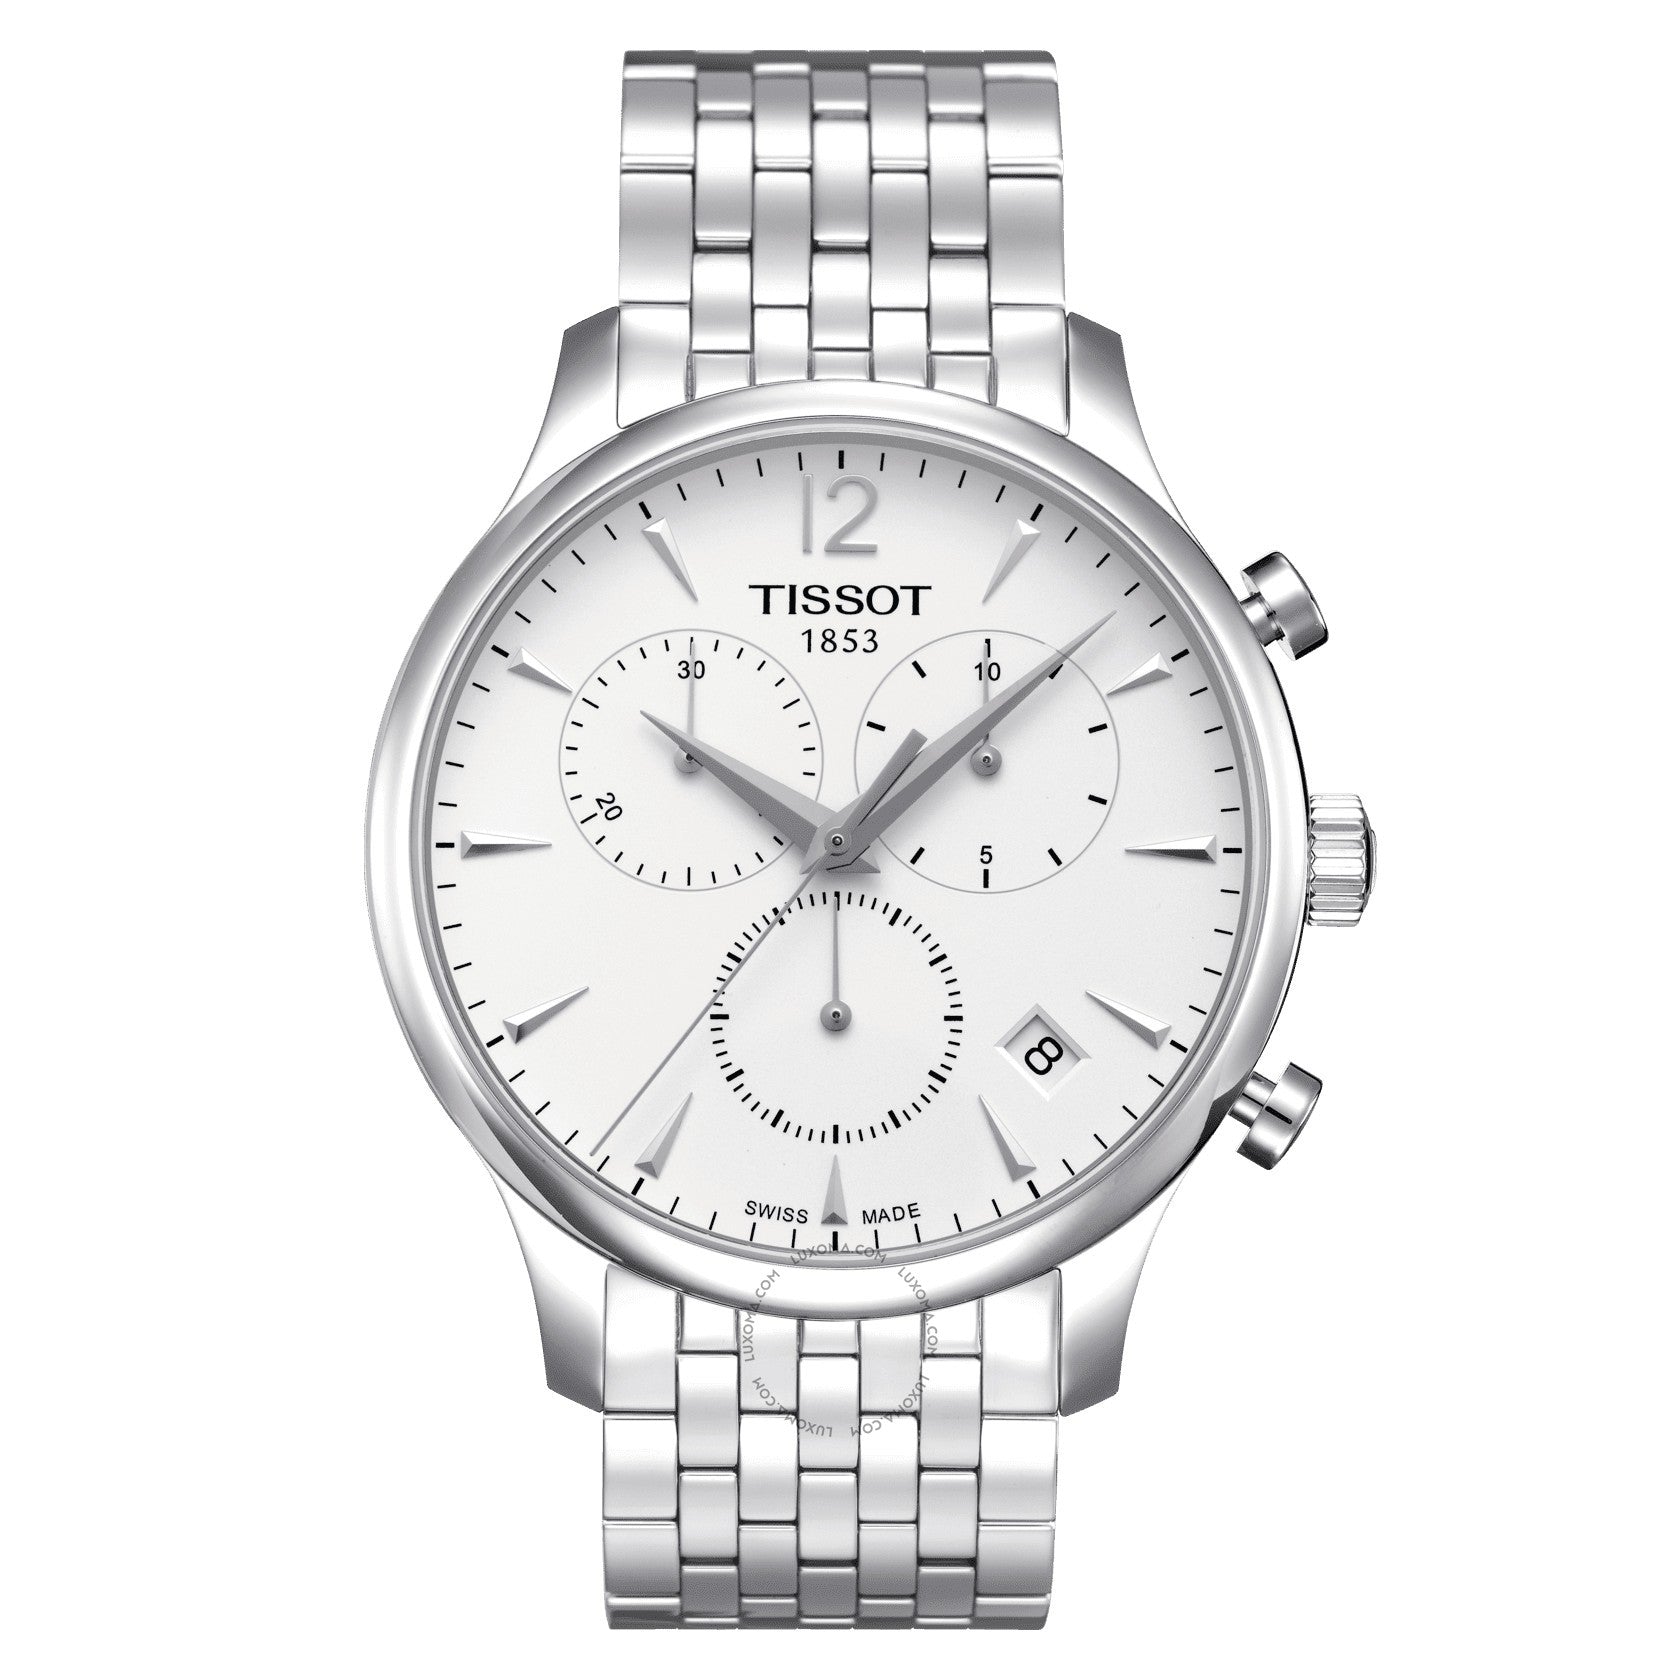 Tissot T-Classic Collection Chronograph White Dial Men's Watch T063.617.11.037.00